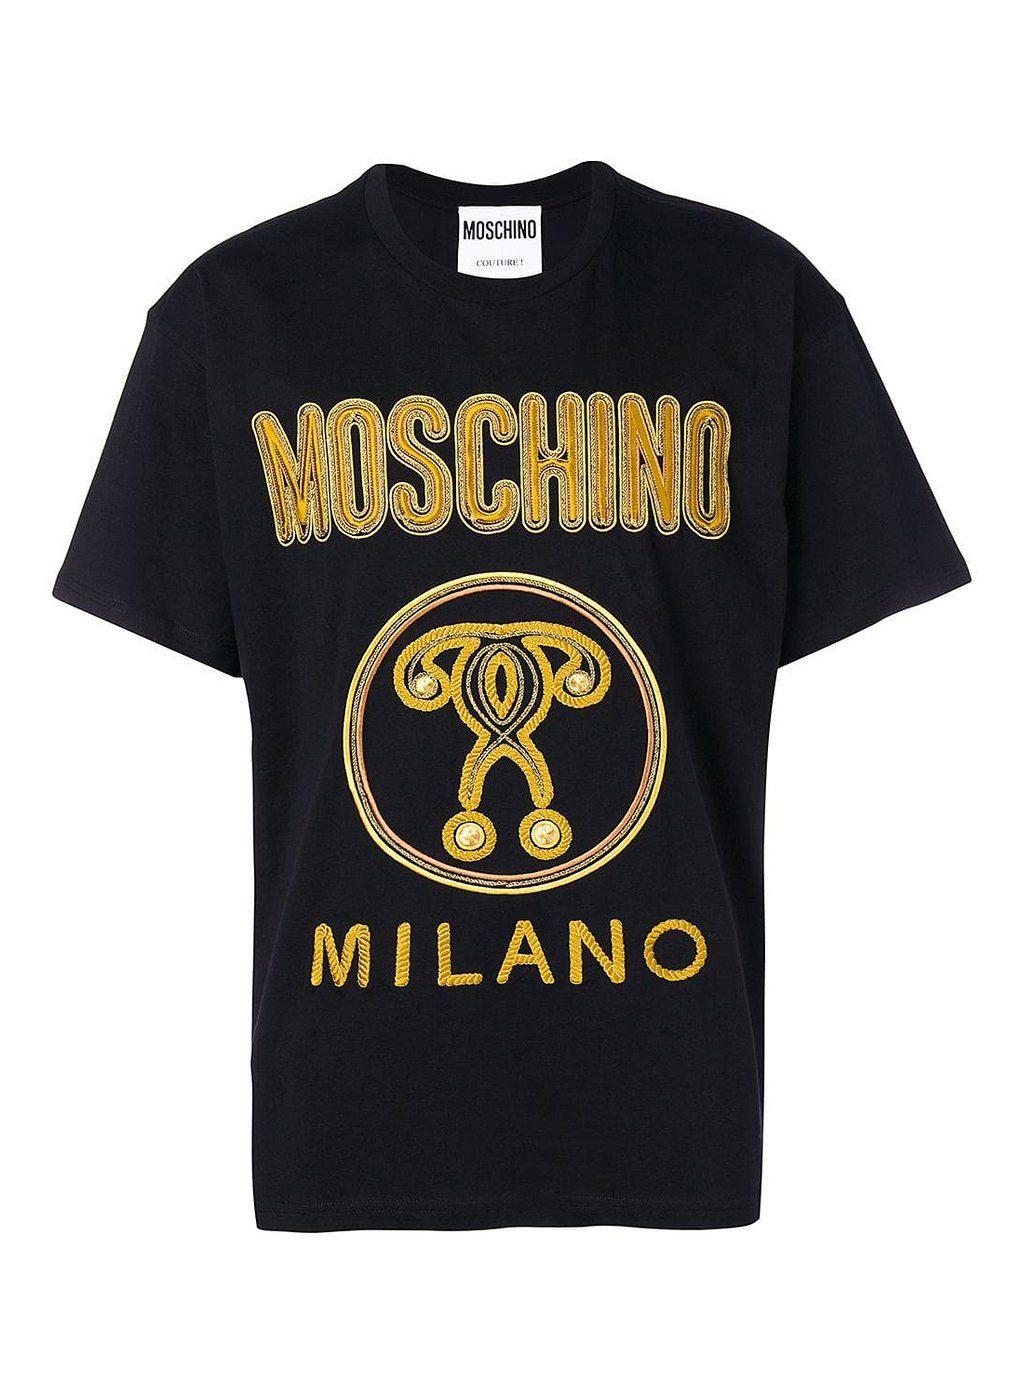 Moschino Gold Logo - Moschino Gold Rope Question Mark Tee. Philip Browne Menswear